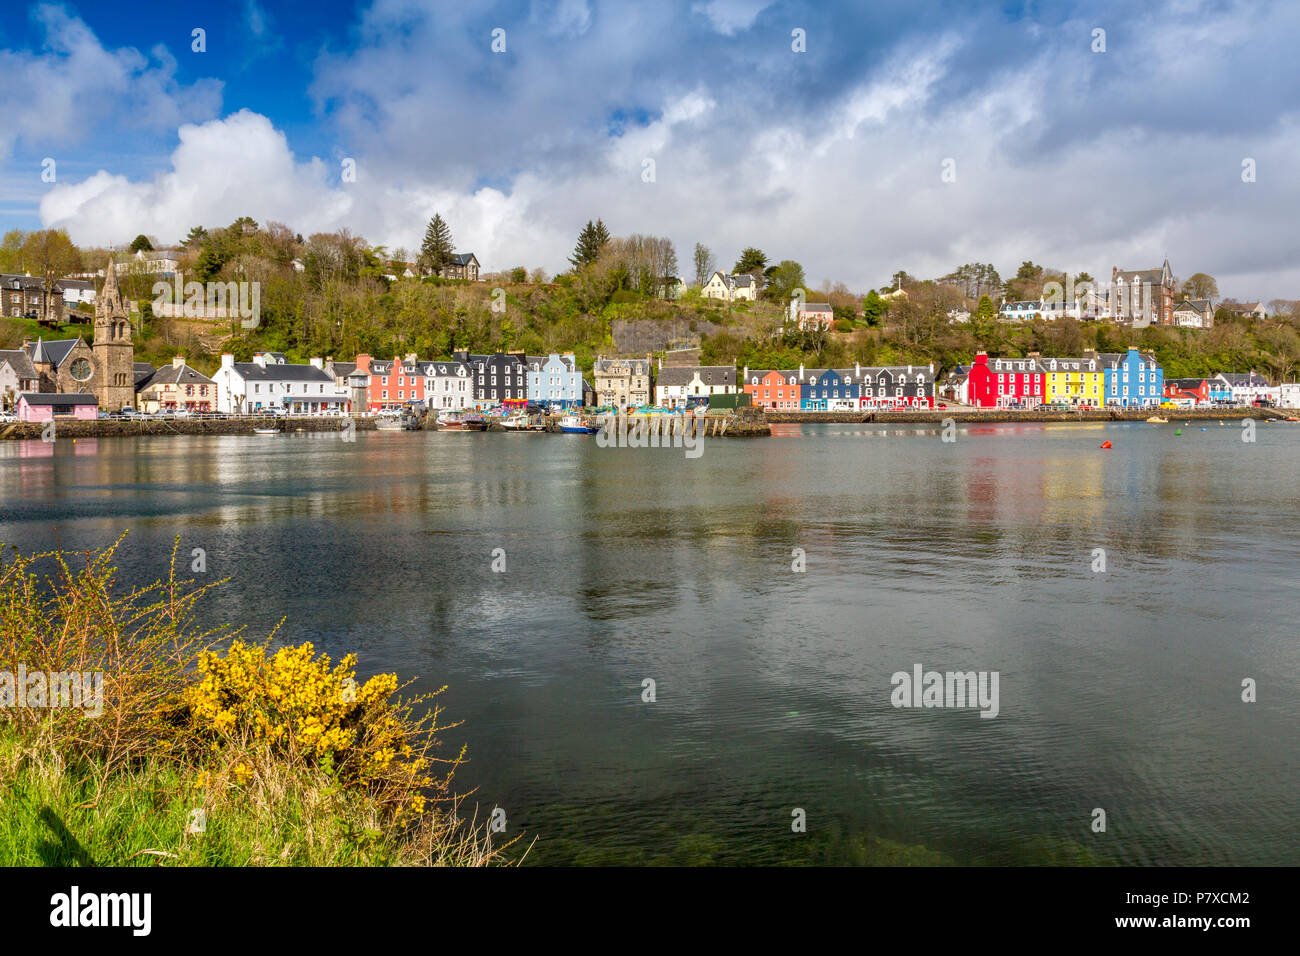 Colourful shops, bars, restaurants, hotels and houses line the historic harbour in Tobermory, Isle of Mull, Argyll and Bute, Scotland, UK Stock Photo